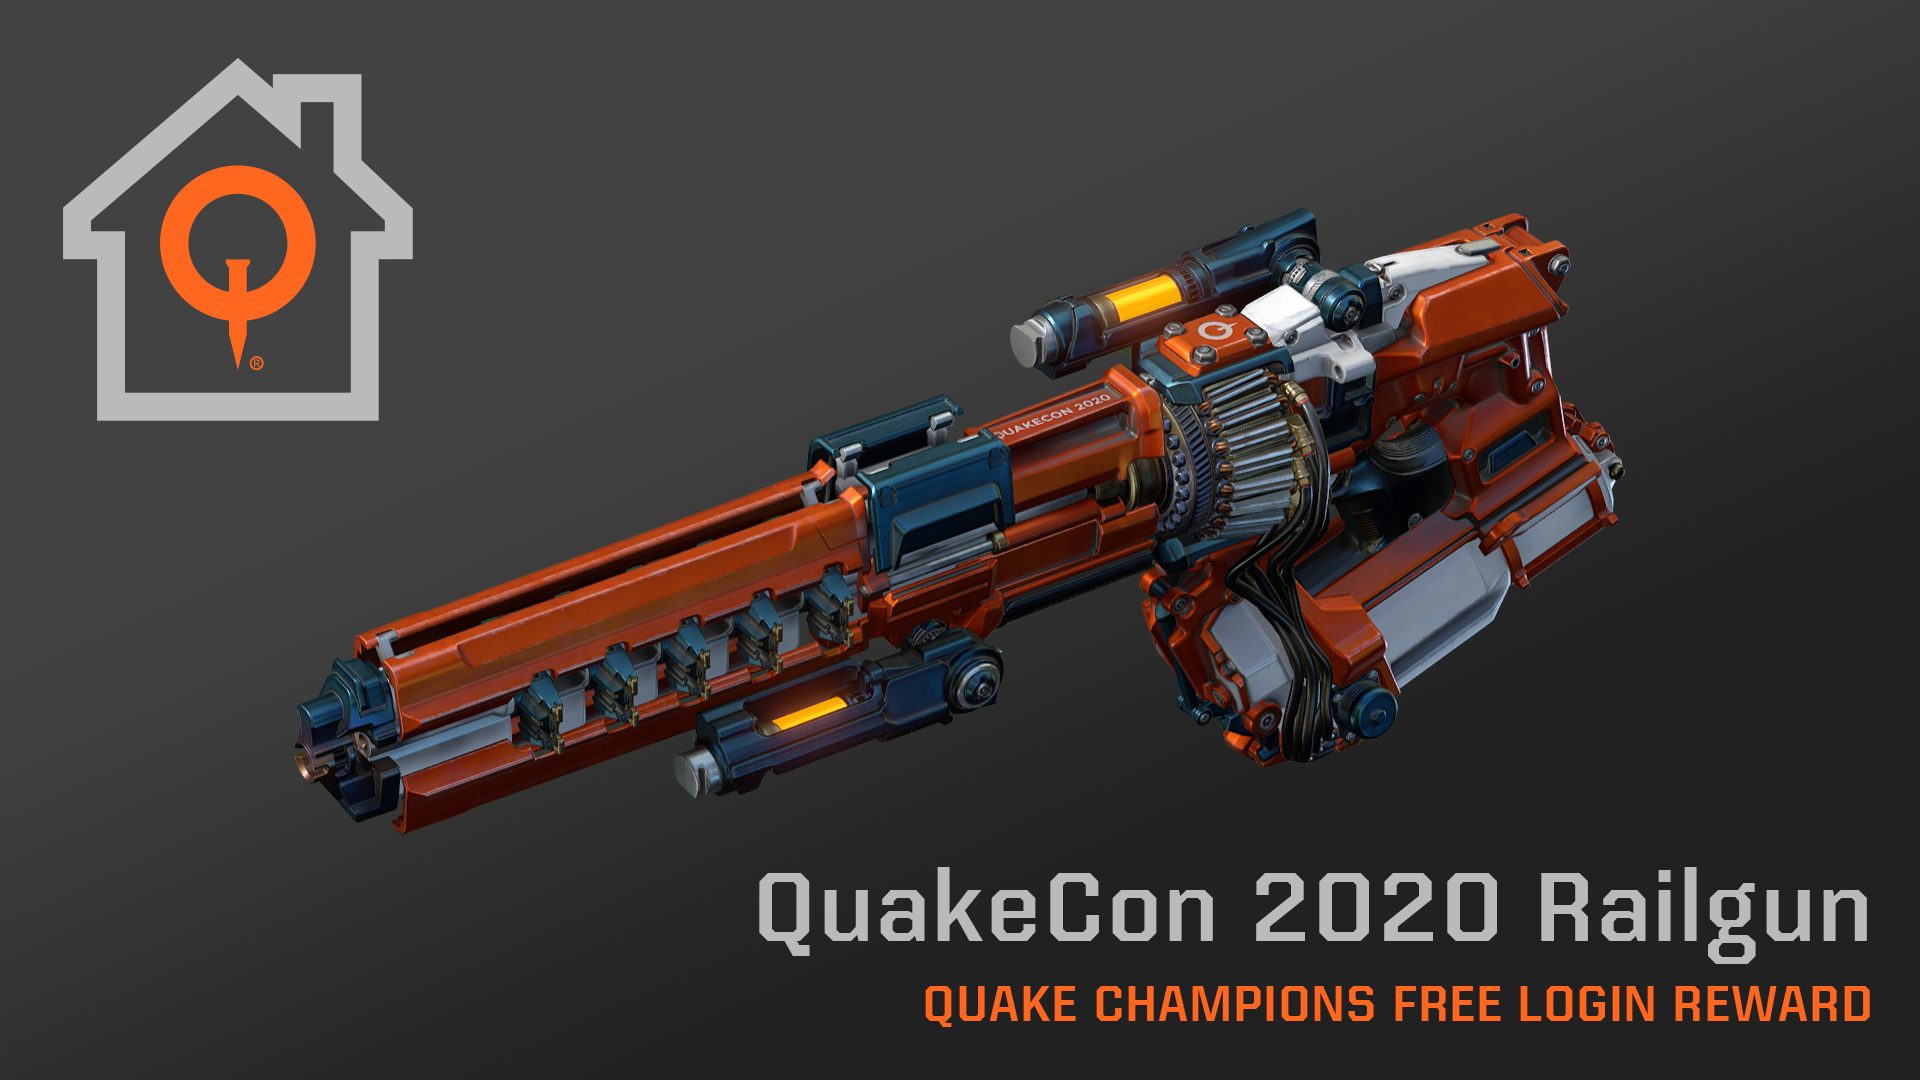 Quake Champions on Twitter: "#QuakeCon Home begins 8/7! Log into Quake during the event and get this exclusive Plus, complete 1 match and unlock ALL Champions, FREE! We've also